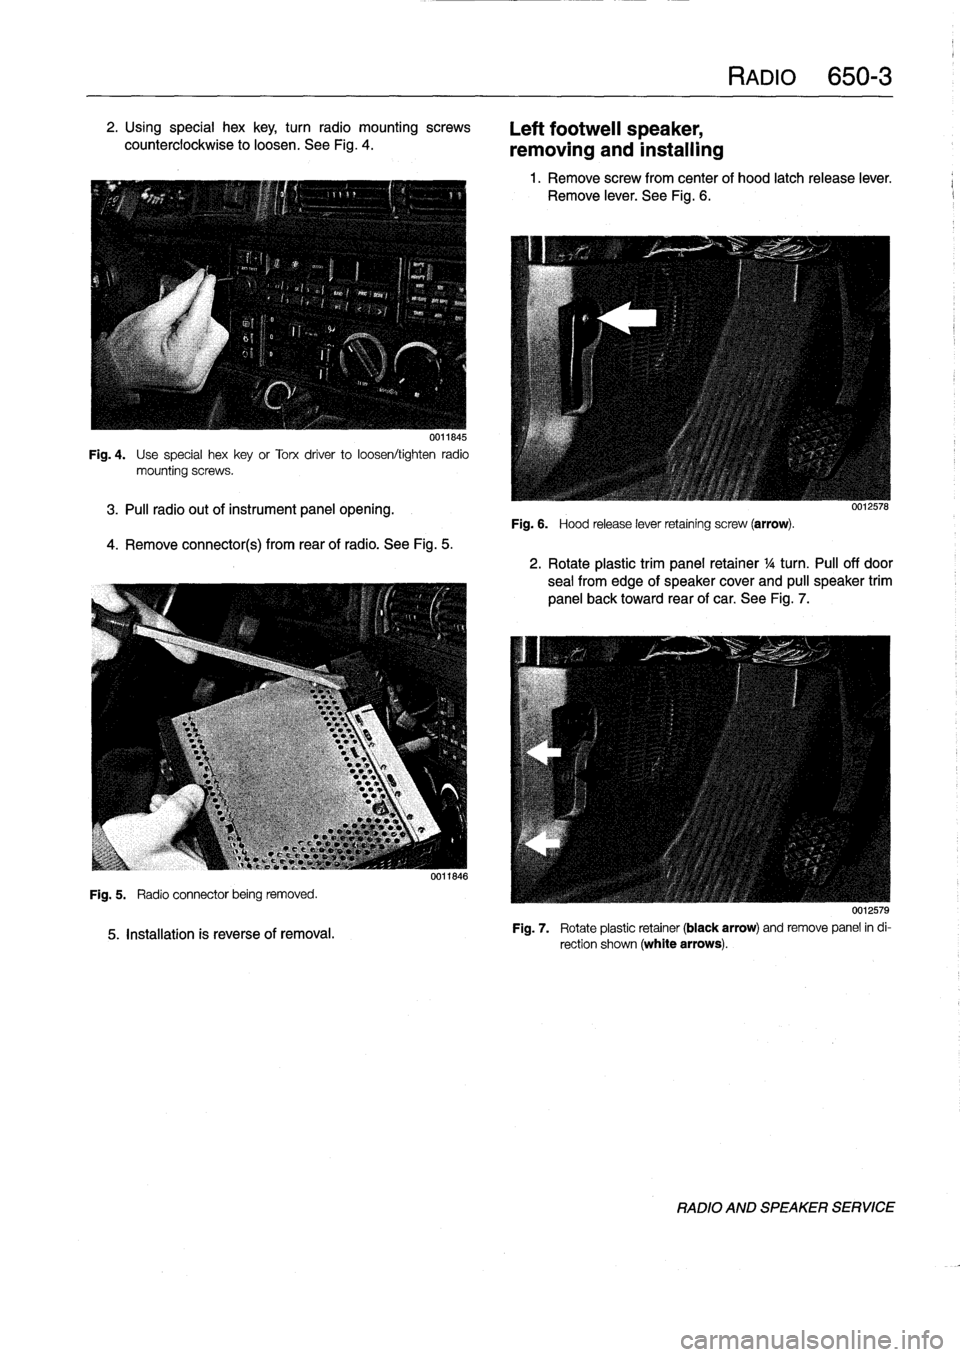 BMW 318i 1995 E36 Workshop Manual 2
.
Using
special
hex
key,
turn
radio
mountingscrews

counterclockwise
to
loosen
.
See
Fig
.
4
.

0011845

Fig
.
4
.

	

Use
special
hexkey
or
Torx
driver
to
loosen/tighten
radio
mountingscrews
.

3
.